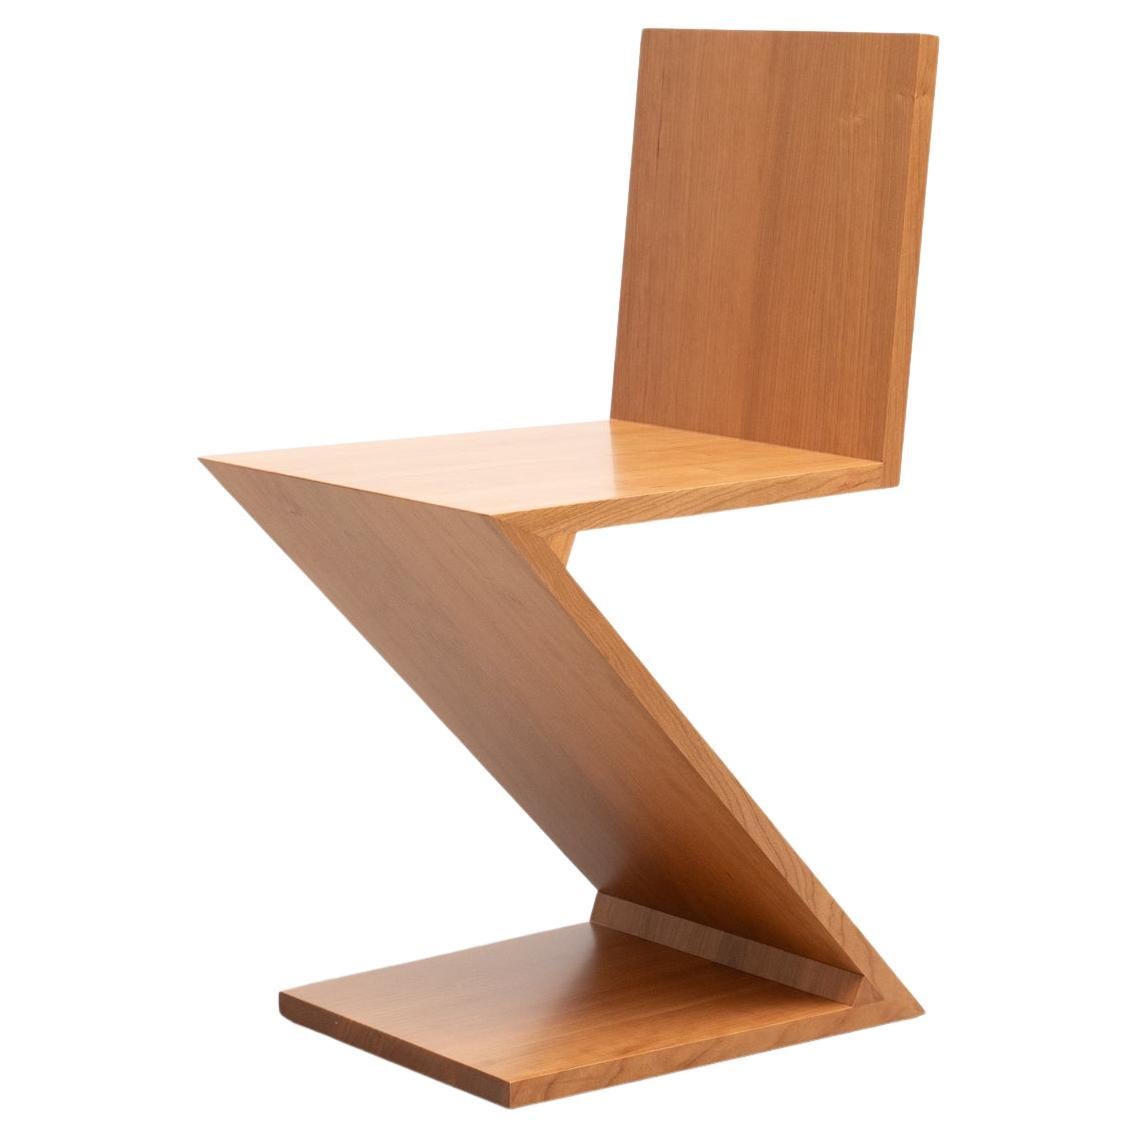 Chair designed by Gerrit Thomas Rietveld in 1934. 

Manufactured by Cassina in Italy, relaunched in 1973/2011.

Designed by Gerrit Rietveld, this chair provided an early example of a cantilevered seat, and is composed of four wood boards articulated